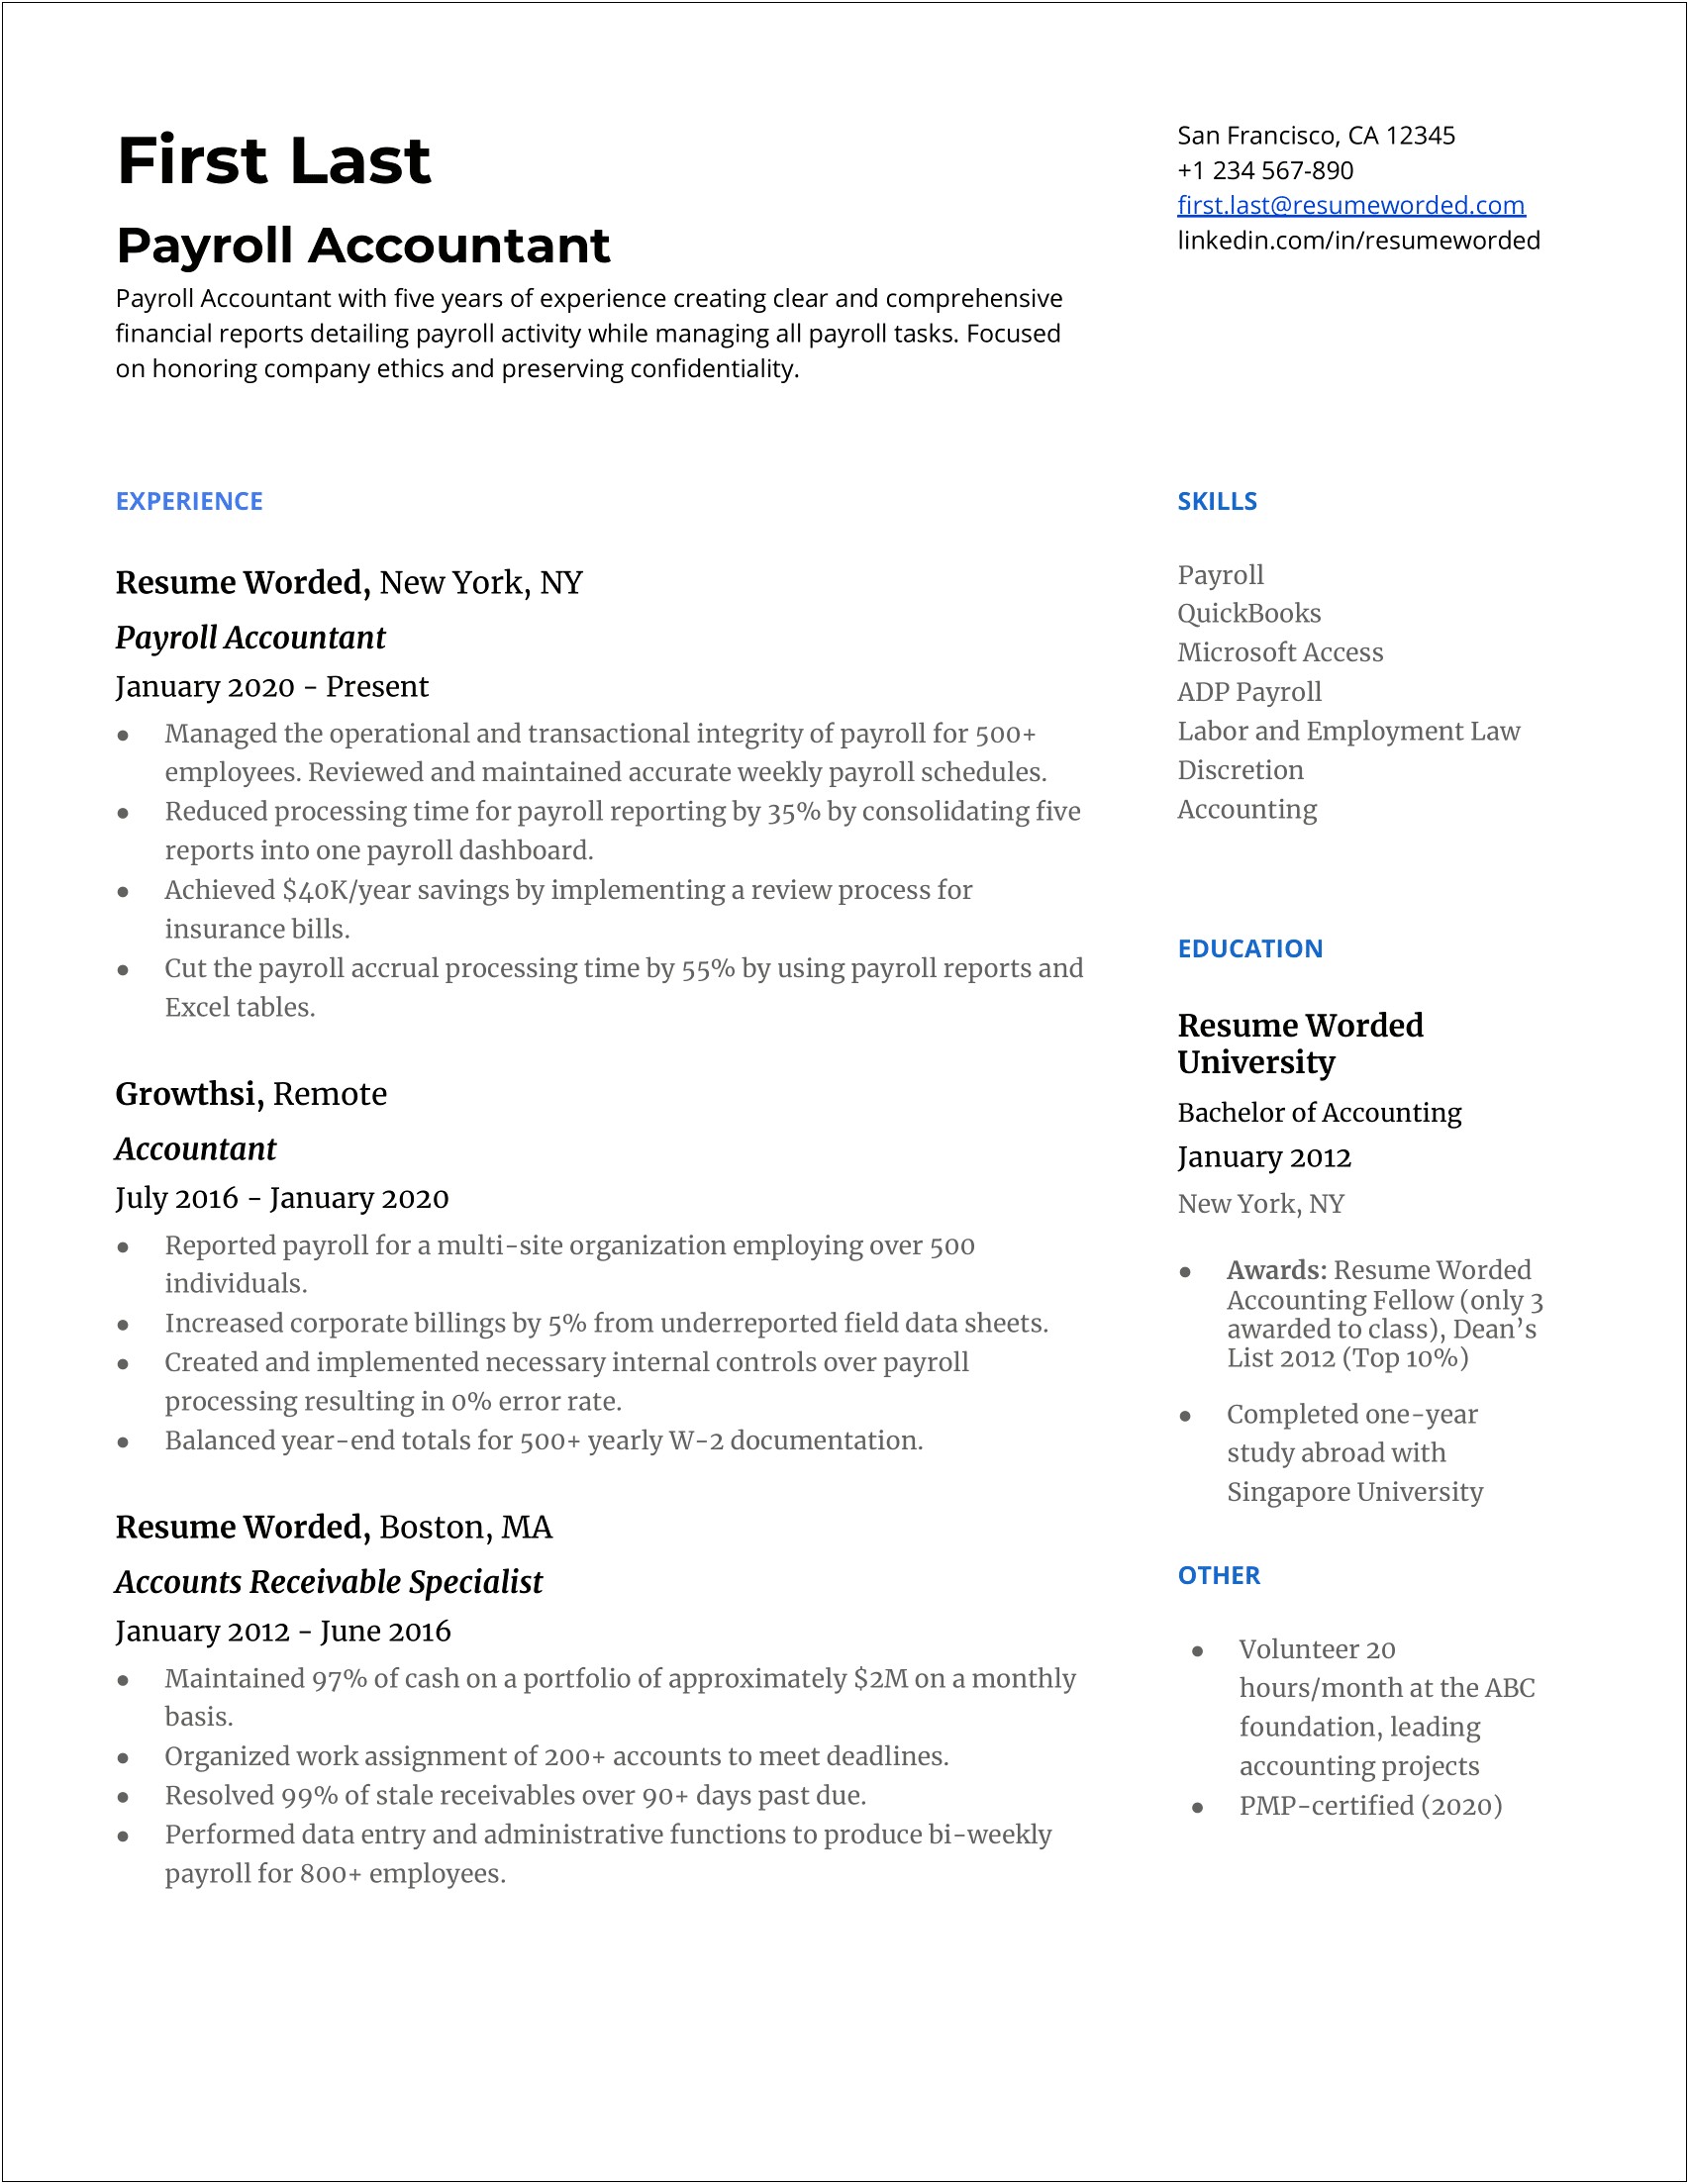 Other Skills To List On Resume For Accounting